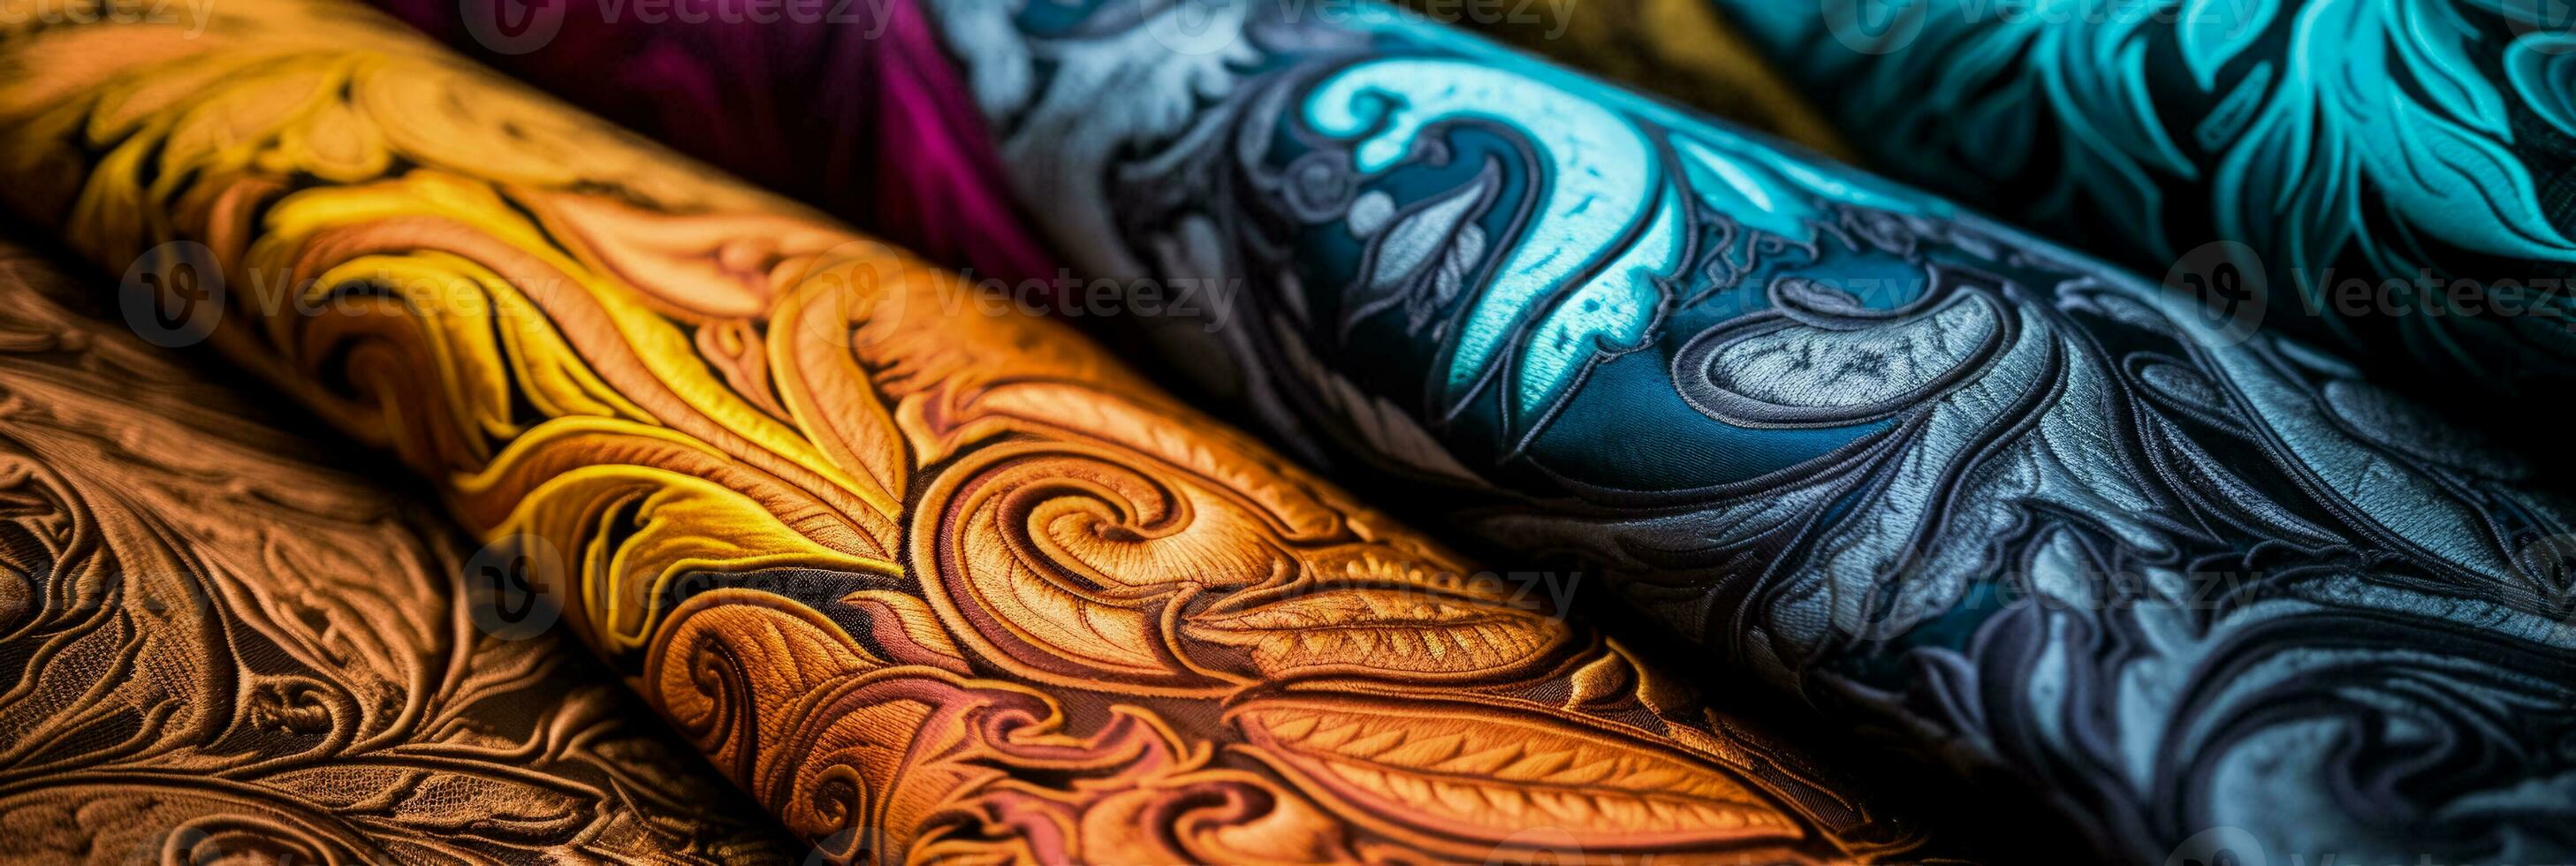 Close ups highlighting detailed paisley designs on a variety of textile materials photo